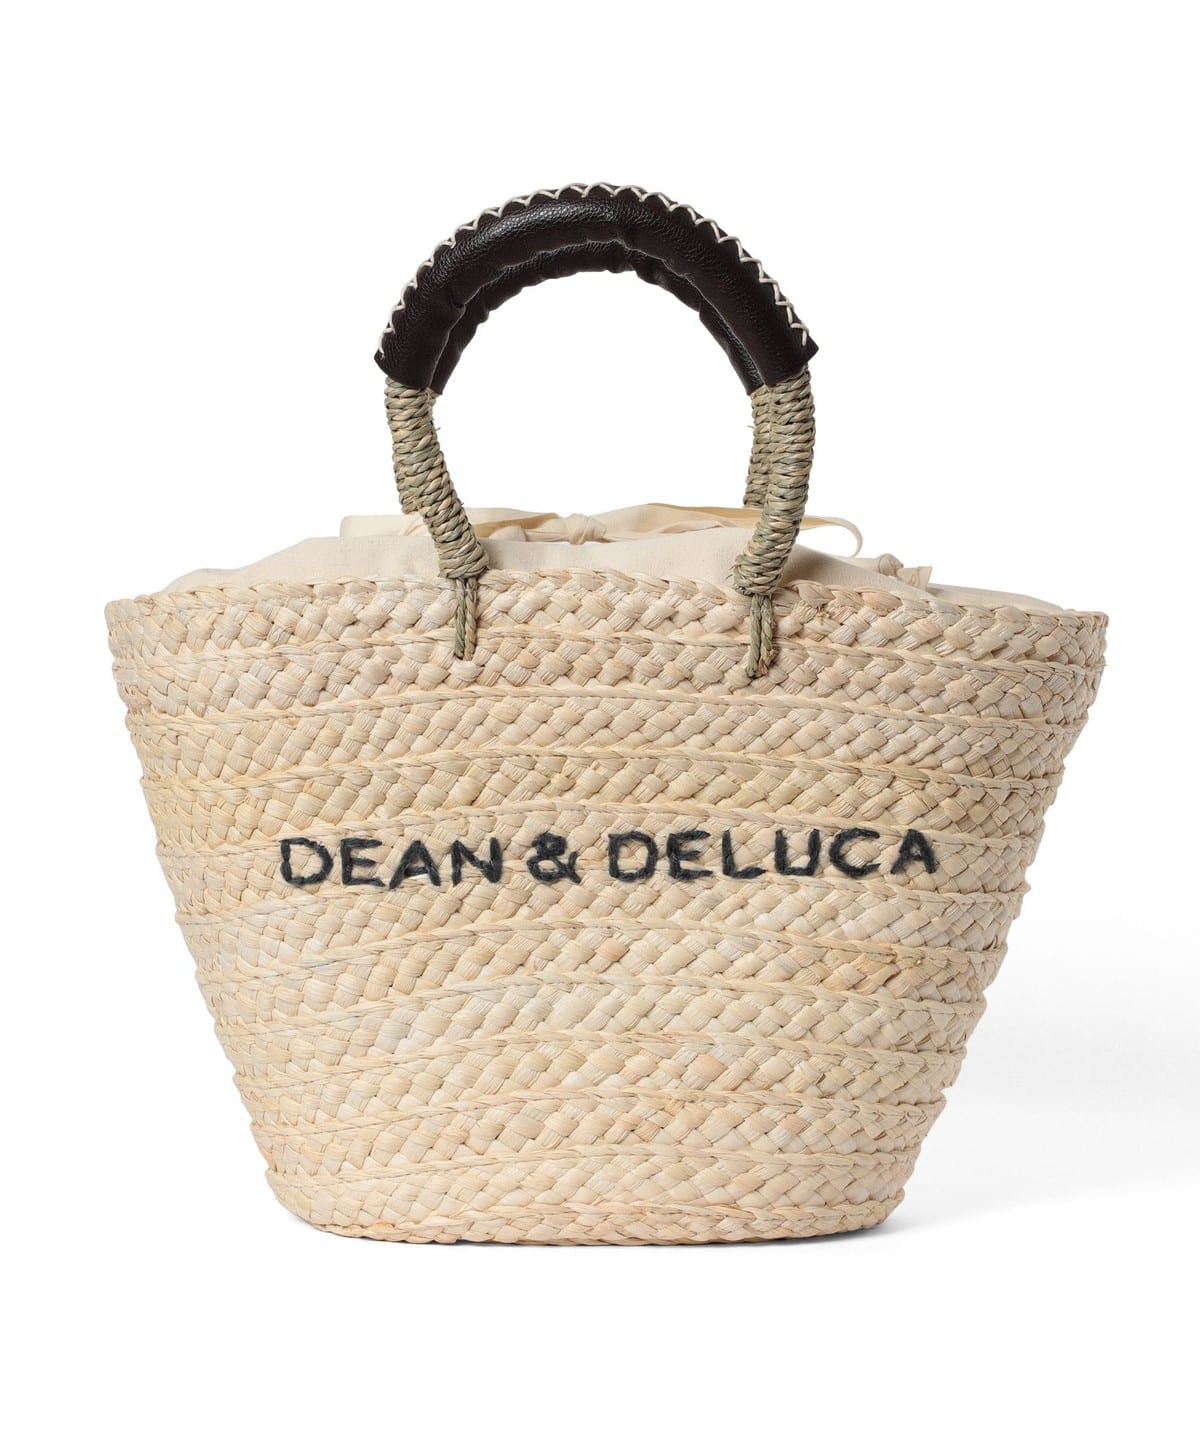 BEAMS COUTURE（ビームス クチュール）【予約】DEAN  DELUCA × BEAMS COUTURE 保冷カゴバッグ大（バッグ  その他バッグ）通販｜BEAMS